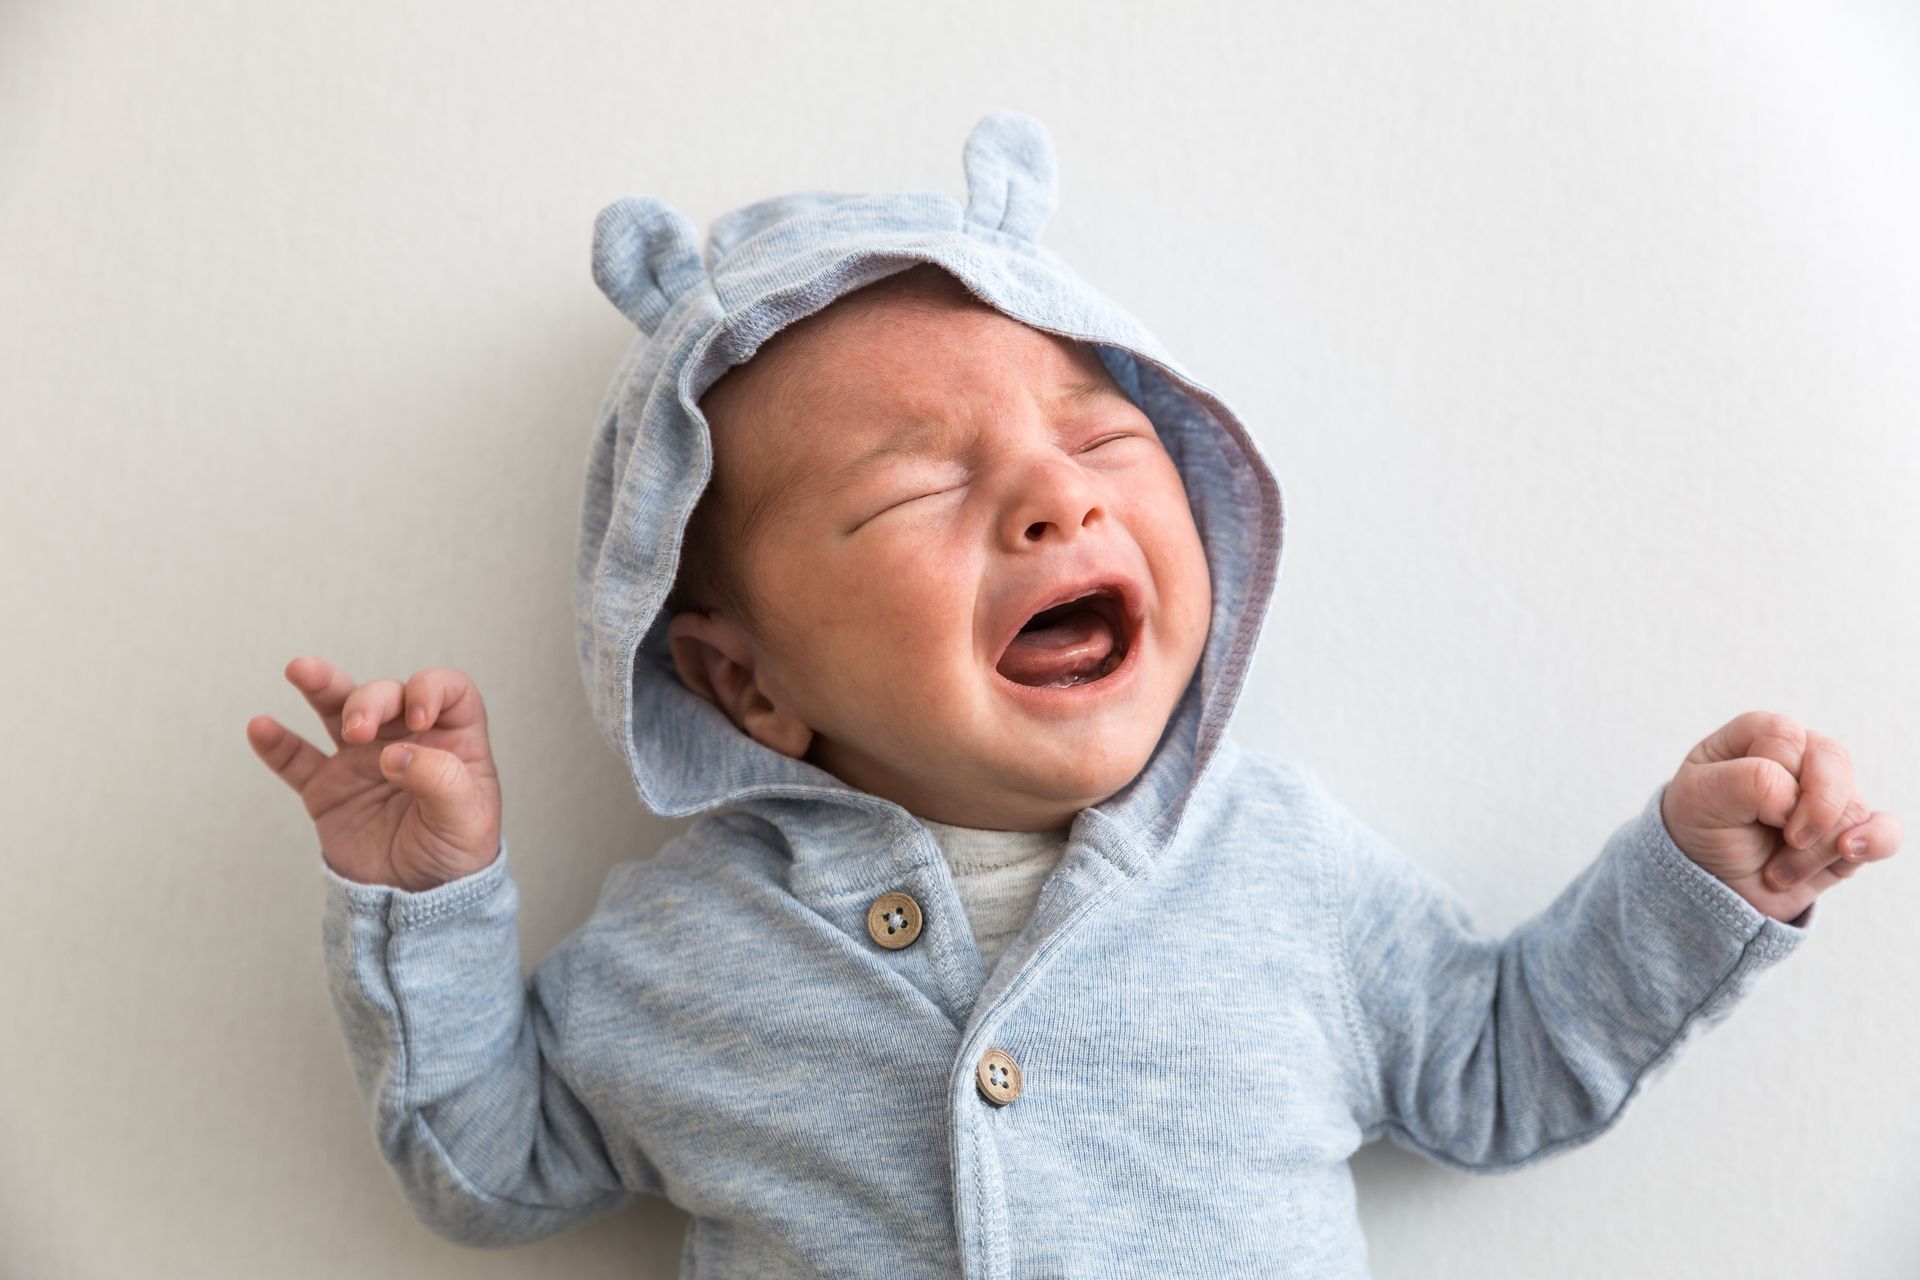 Parent's Guide: Why is My Baby Crying?